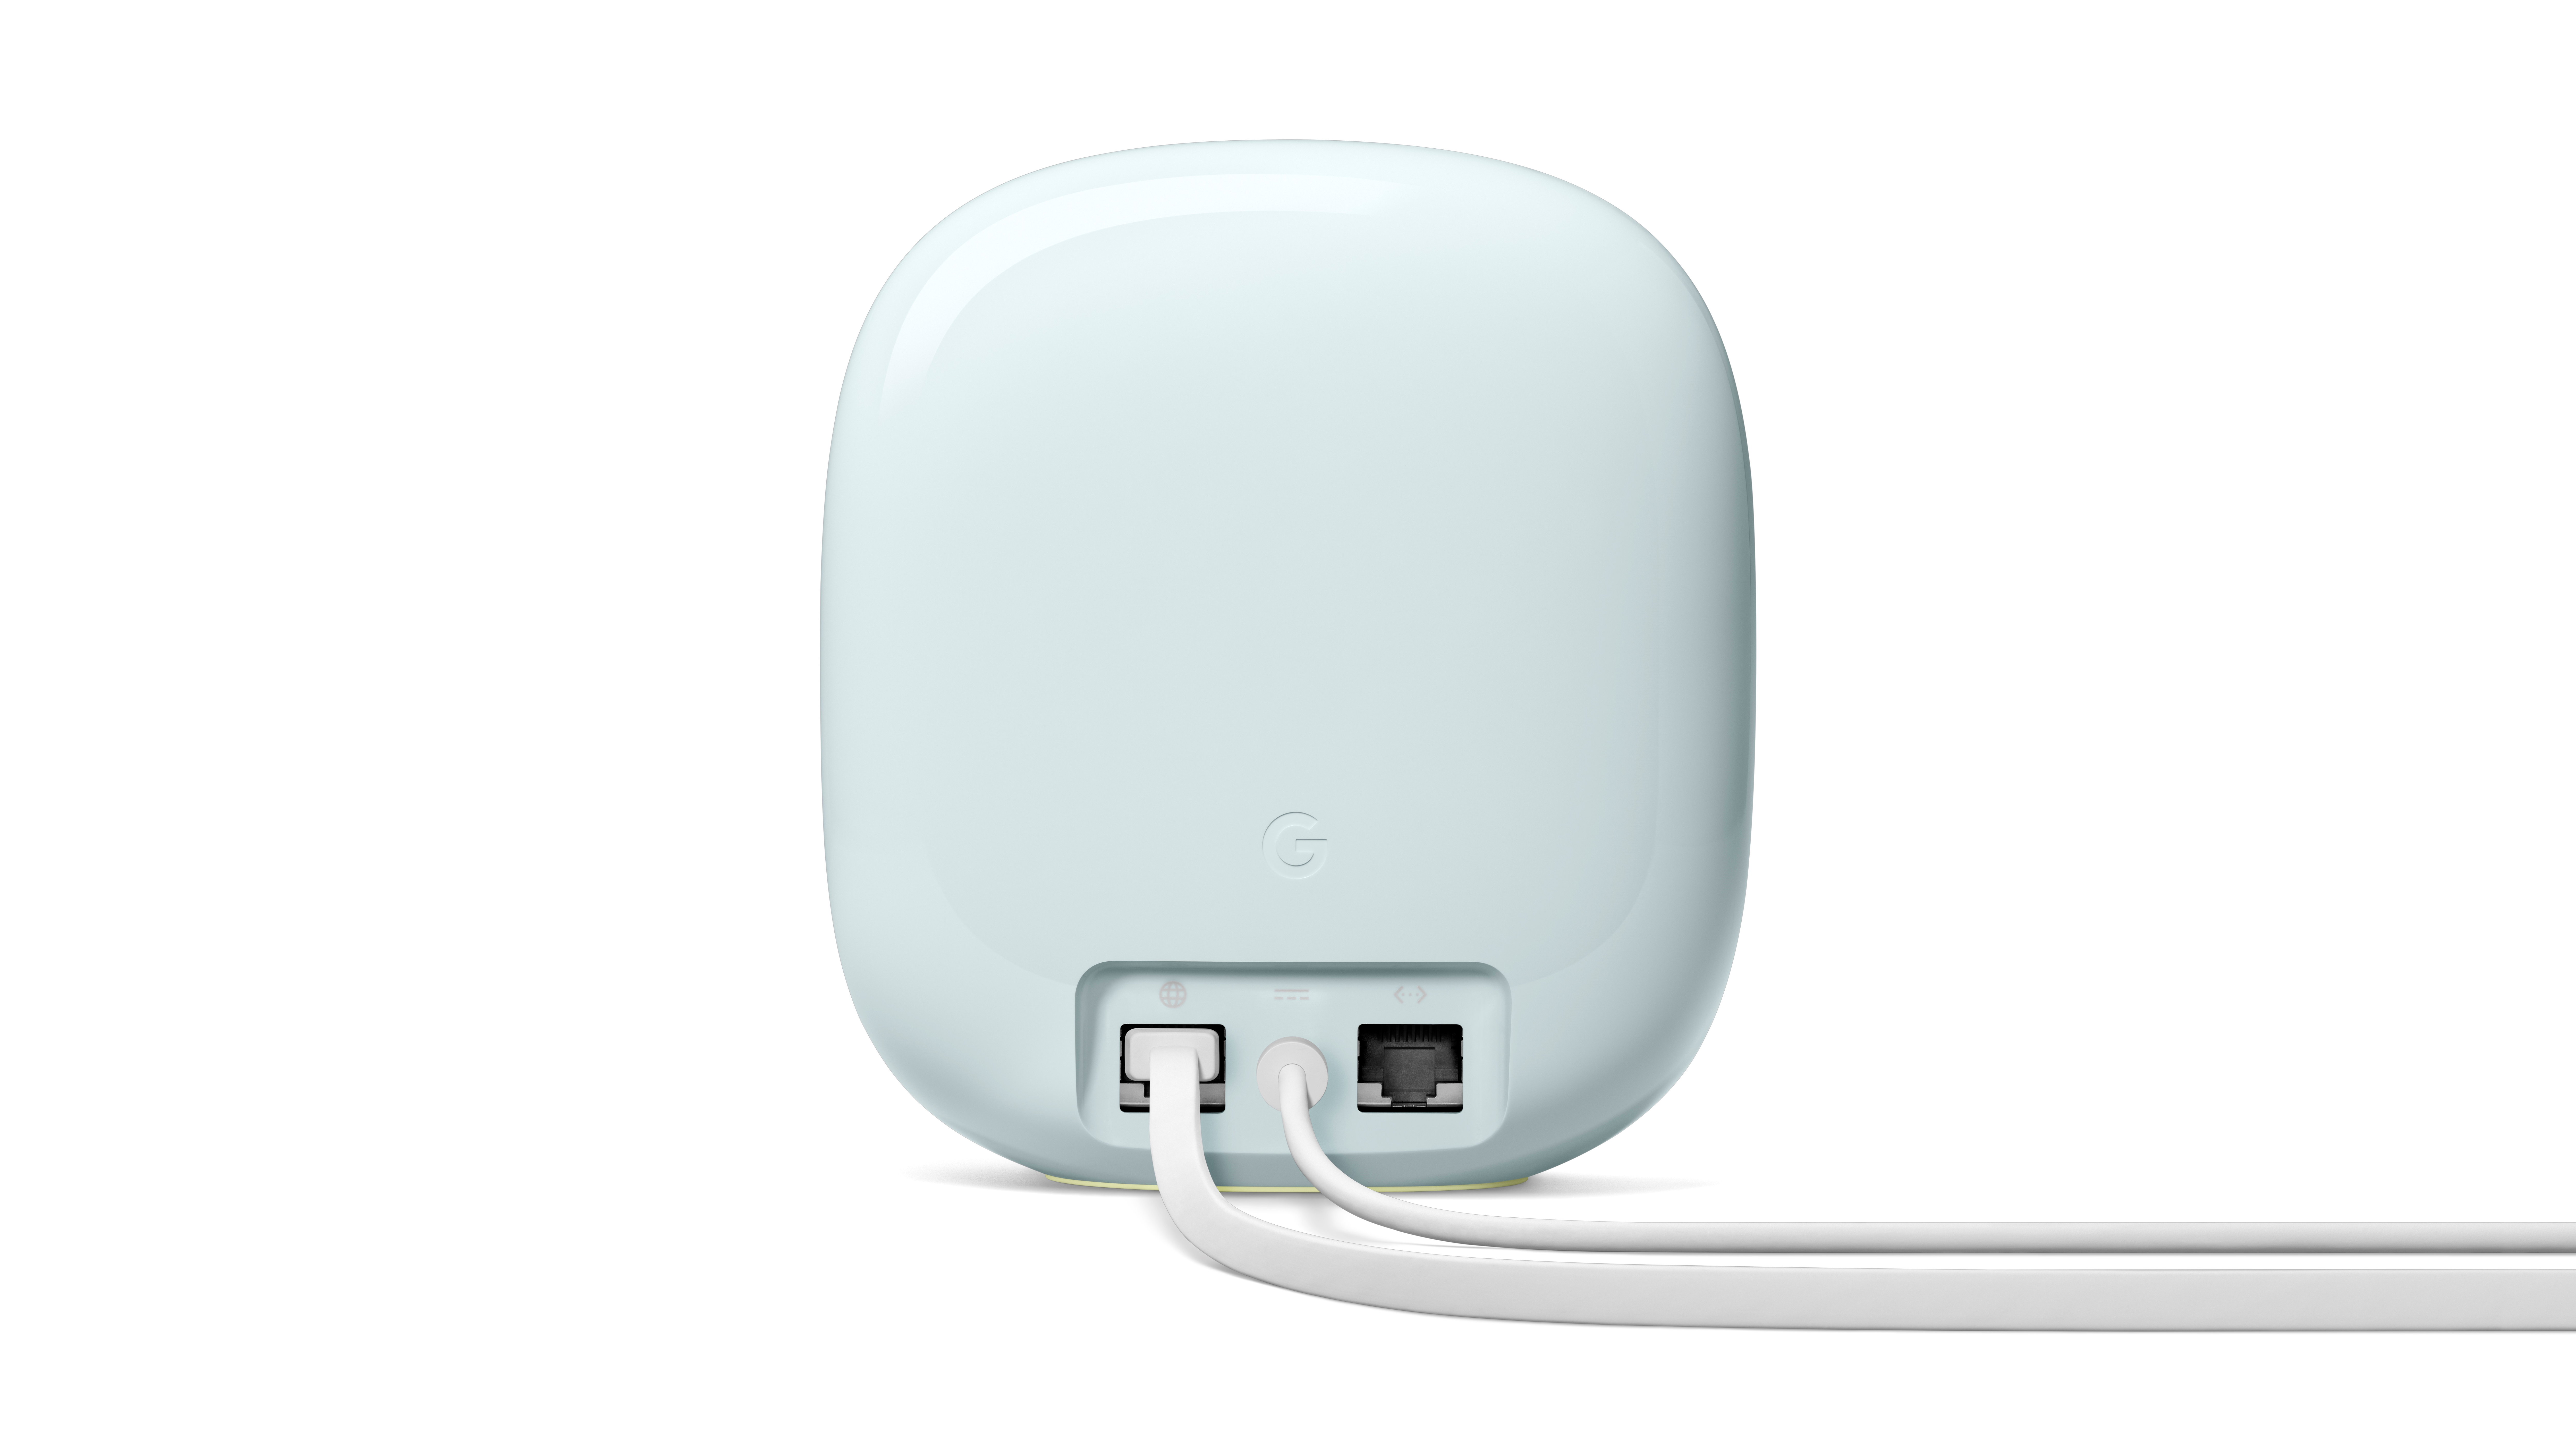 The rear ports of the Nest Wifi Pro